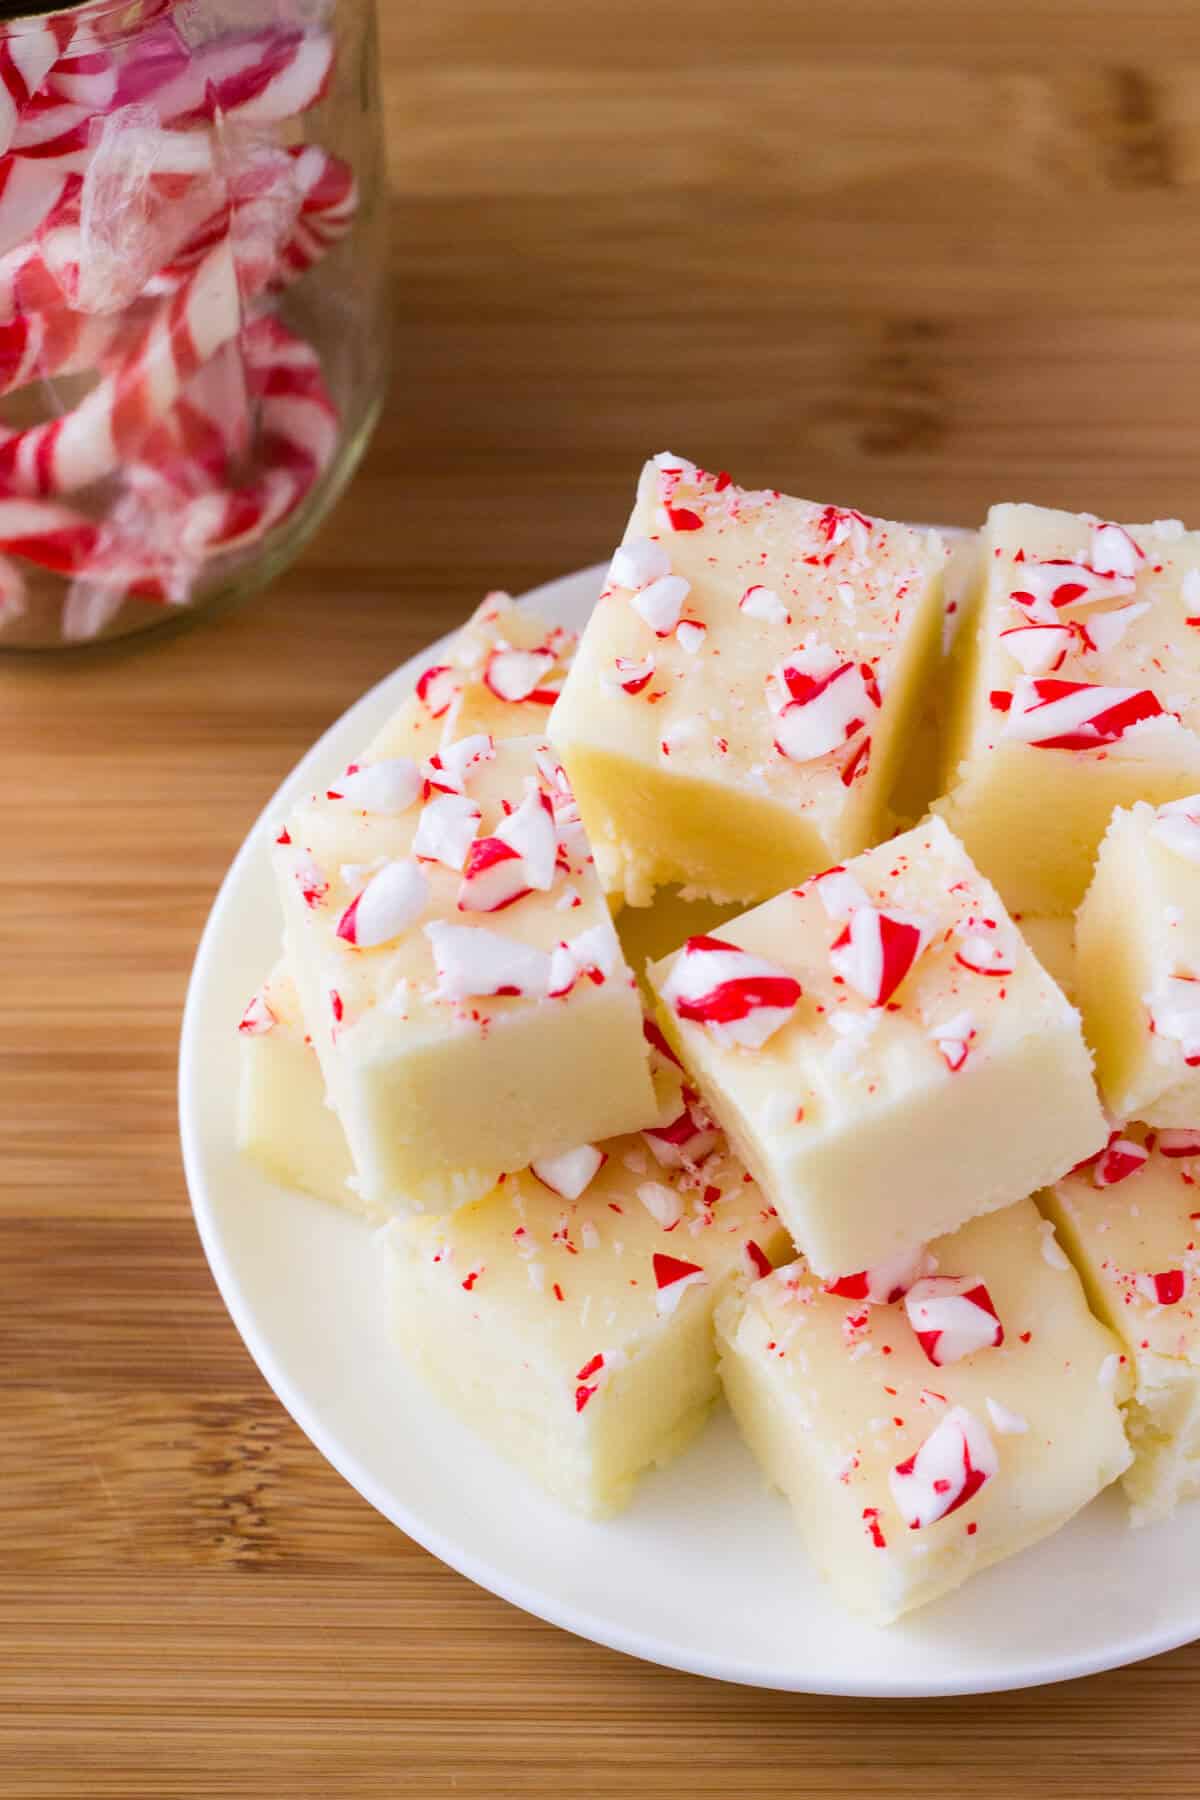 Creamy White Chocolate Peppermint Fudge. So delicious & perfect for the holidays - it makes a decadent, delicious gift! www.justsotasty.com